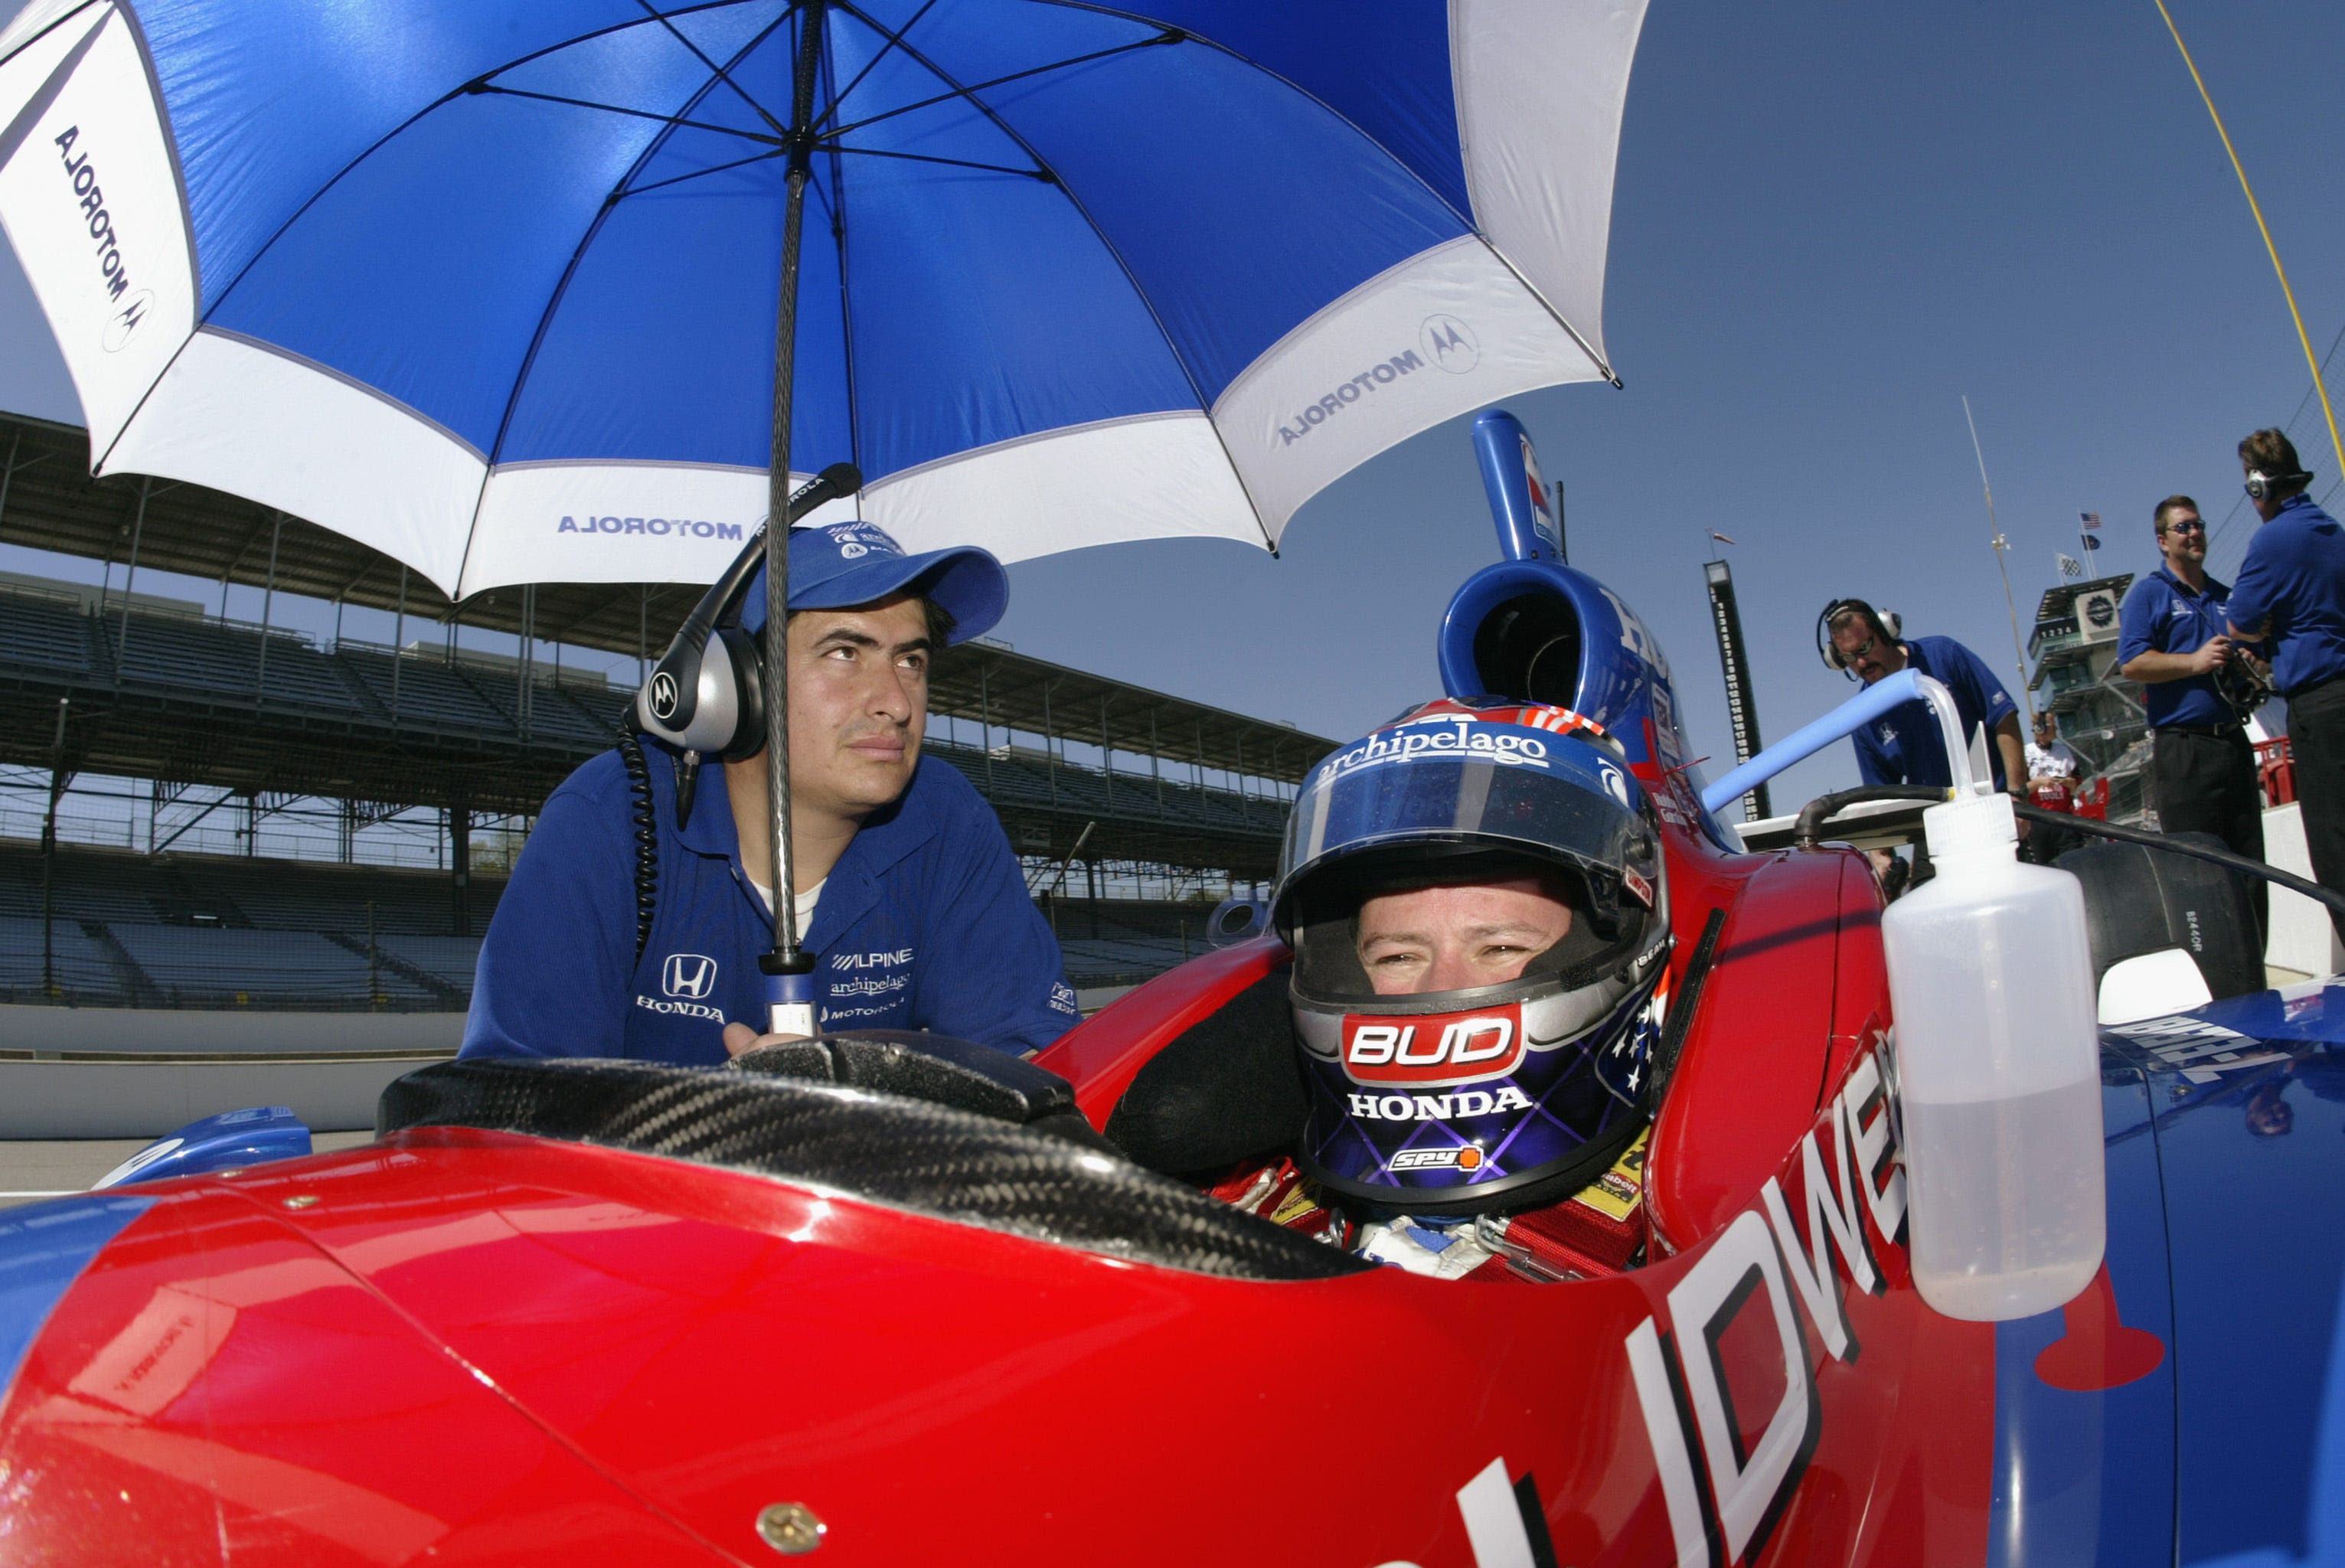 Double Duty history: Kyle Larson joins small club of Indy 500, Coca-Cola 600 drivers